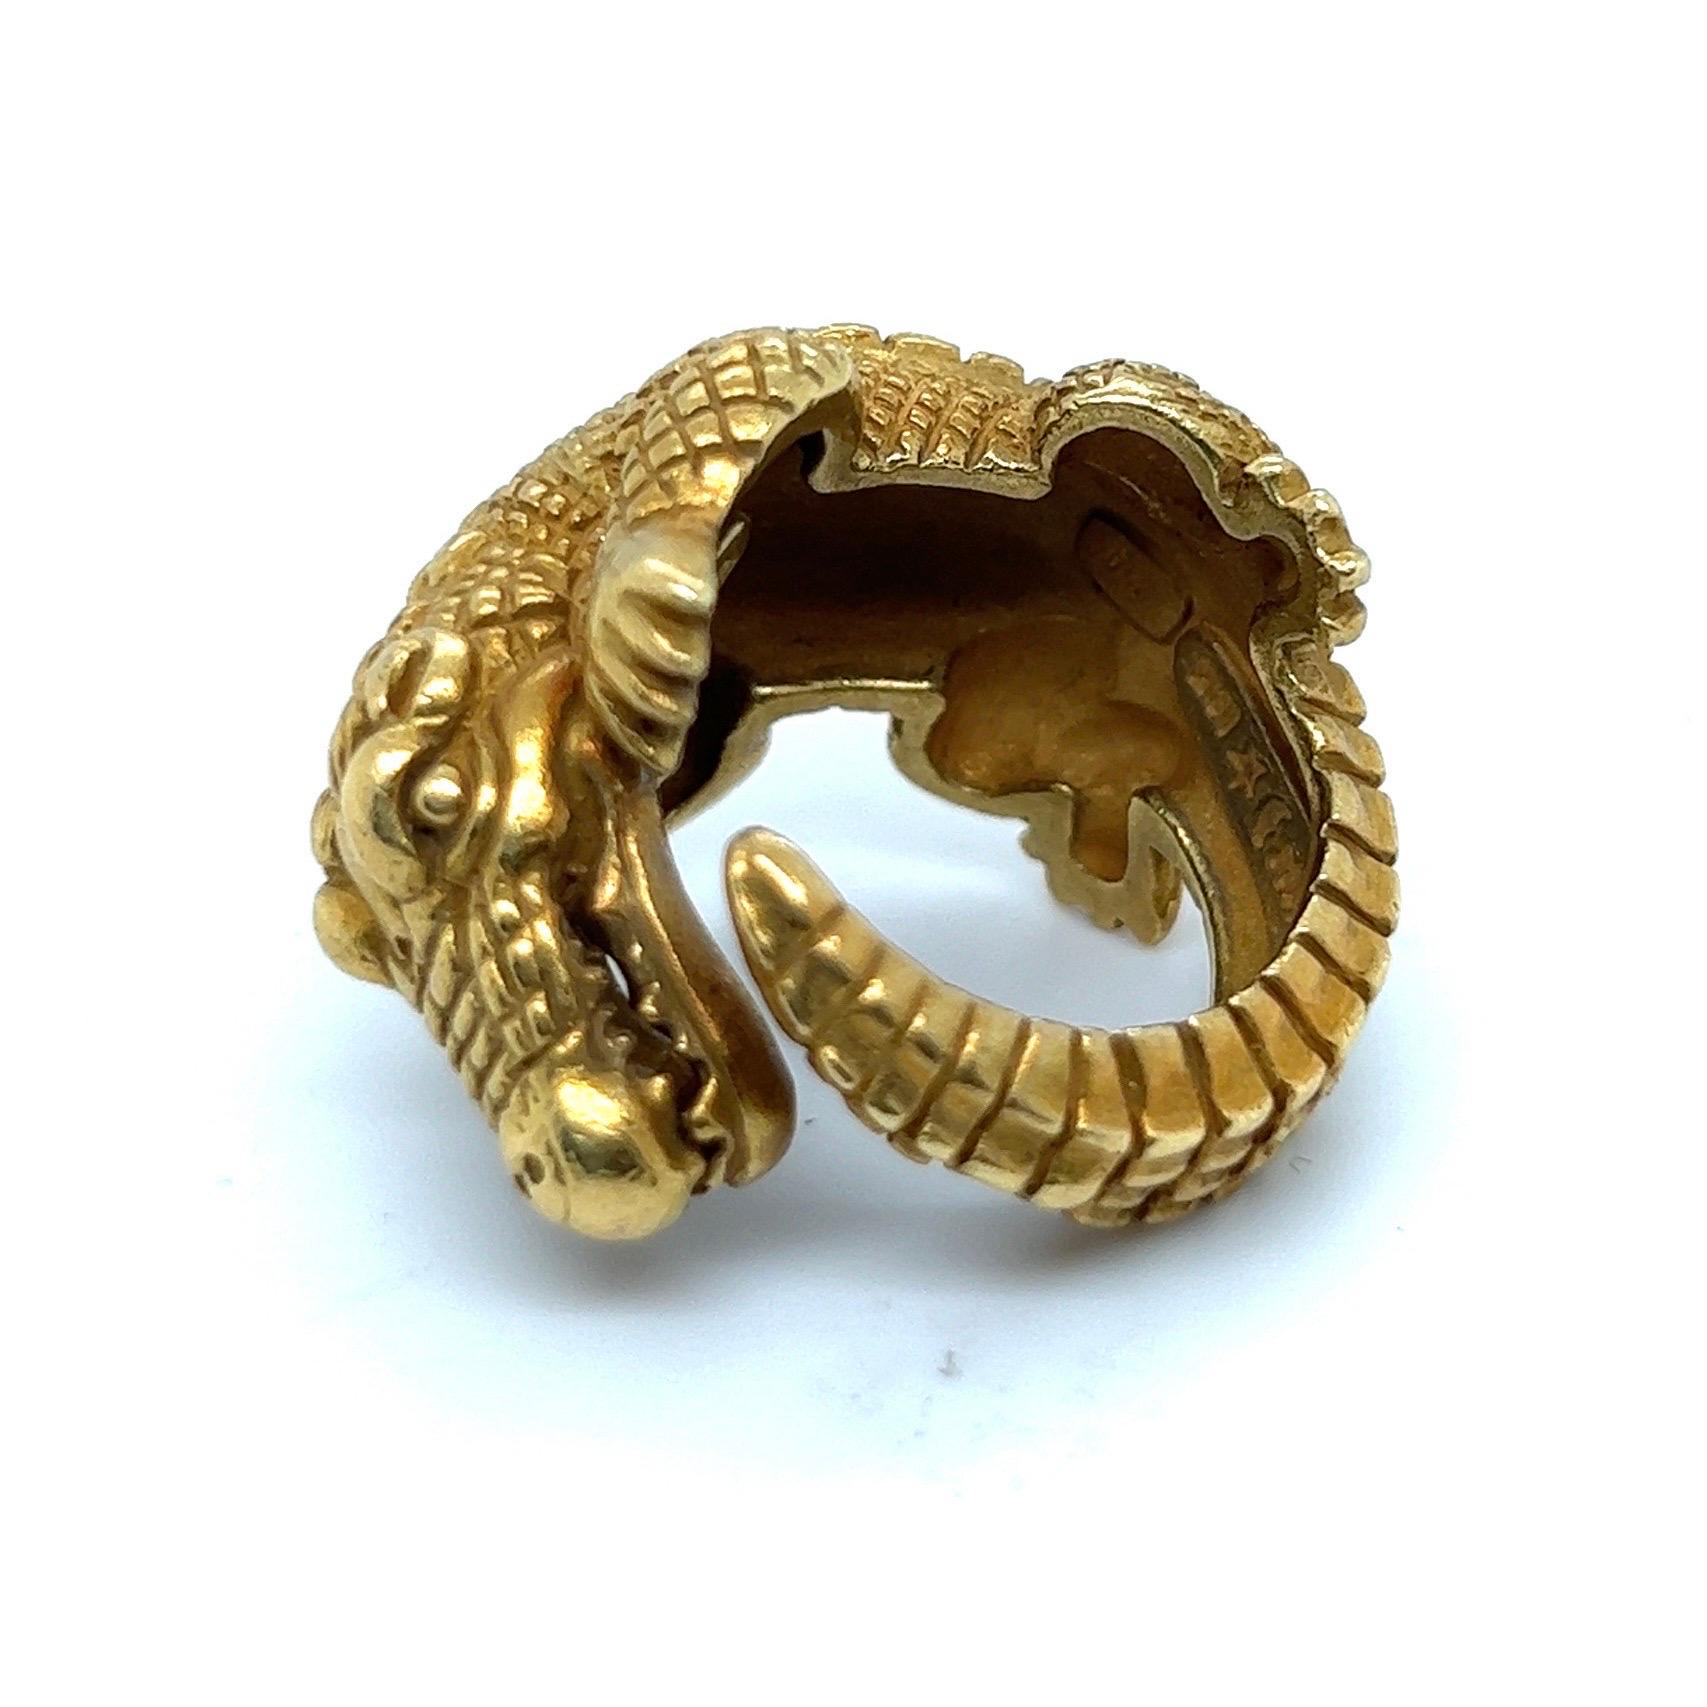 Eye-catching 18 karat yellow gold alligator ring by Kieselstein-Cord, 1988. 

Crafted in 18 karat yellow gold, this spectacular ring coils around the finger depicting Kieselstein-Cords most iconic creature, the alligator.
The alligator series by